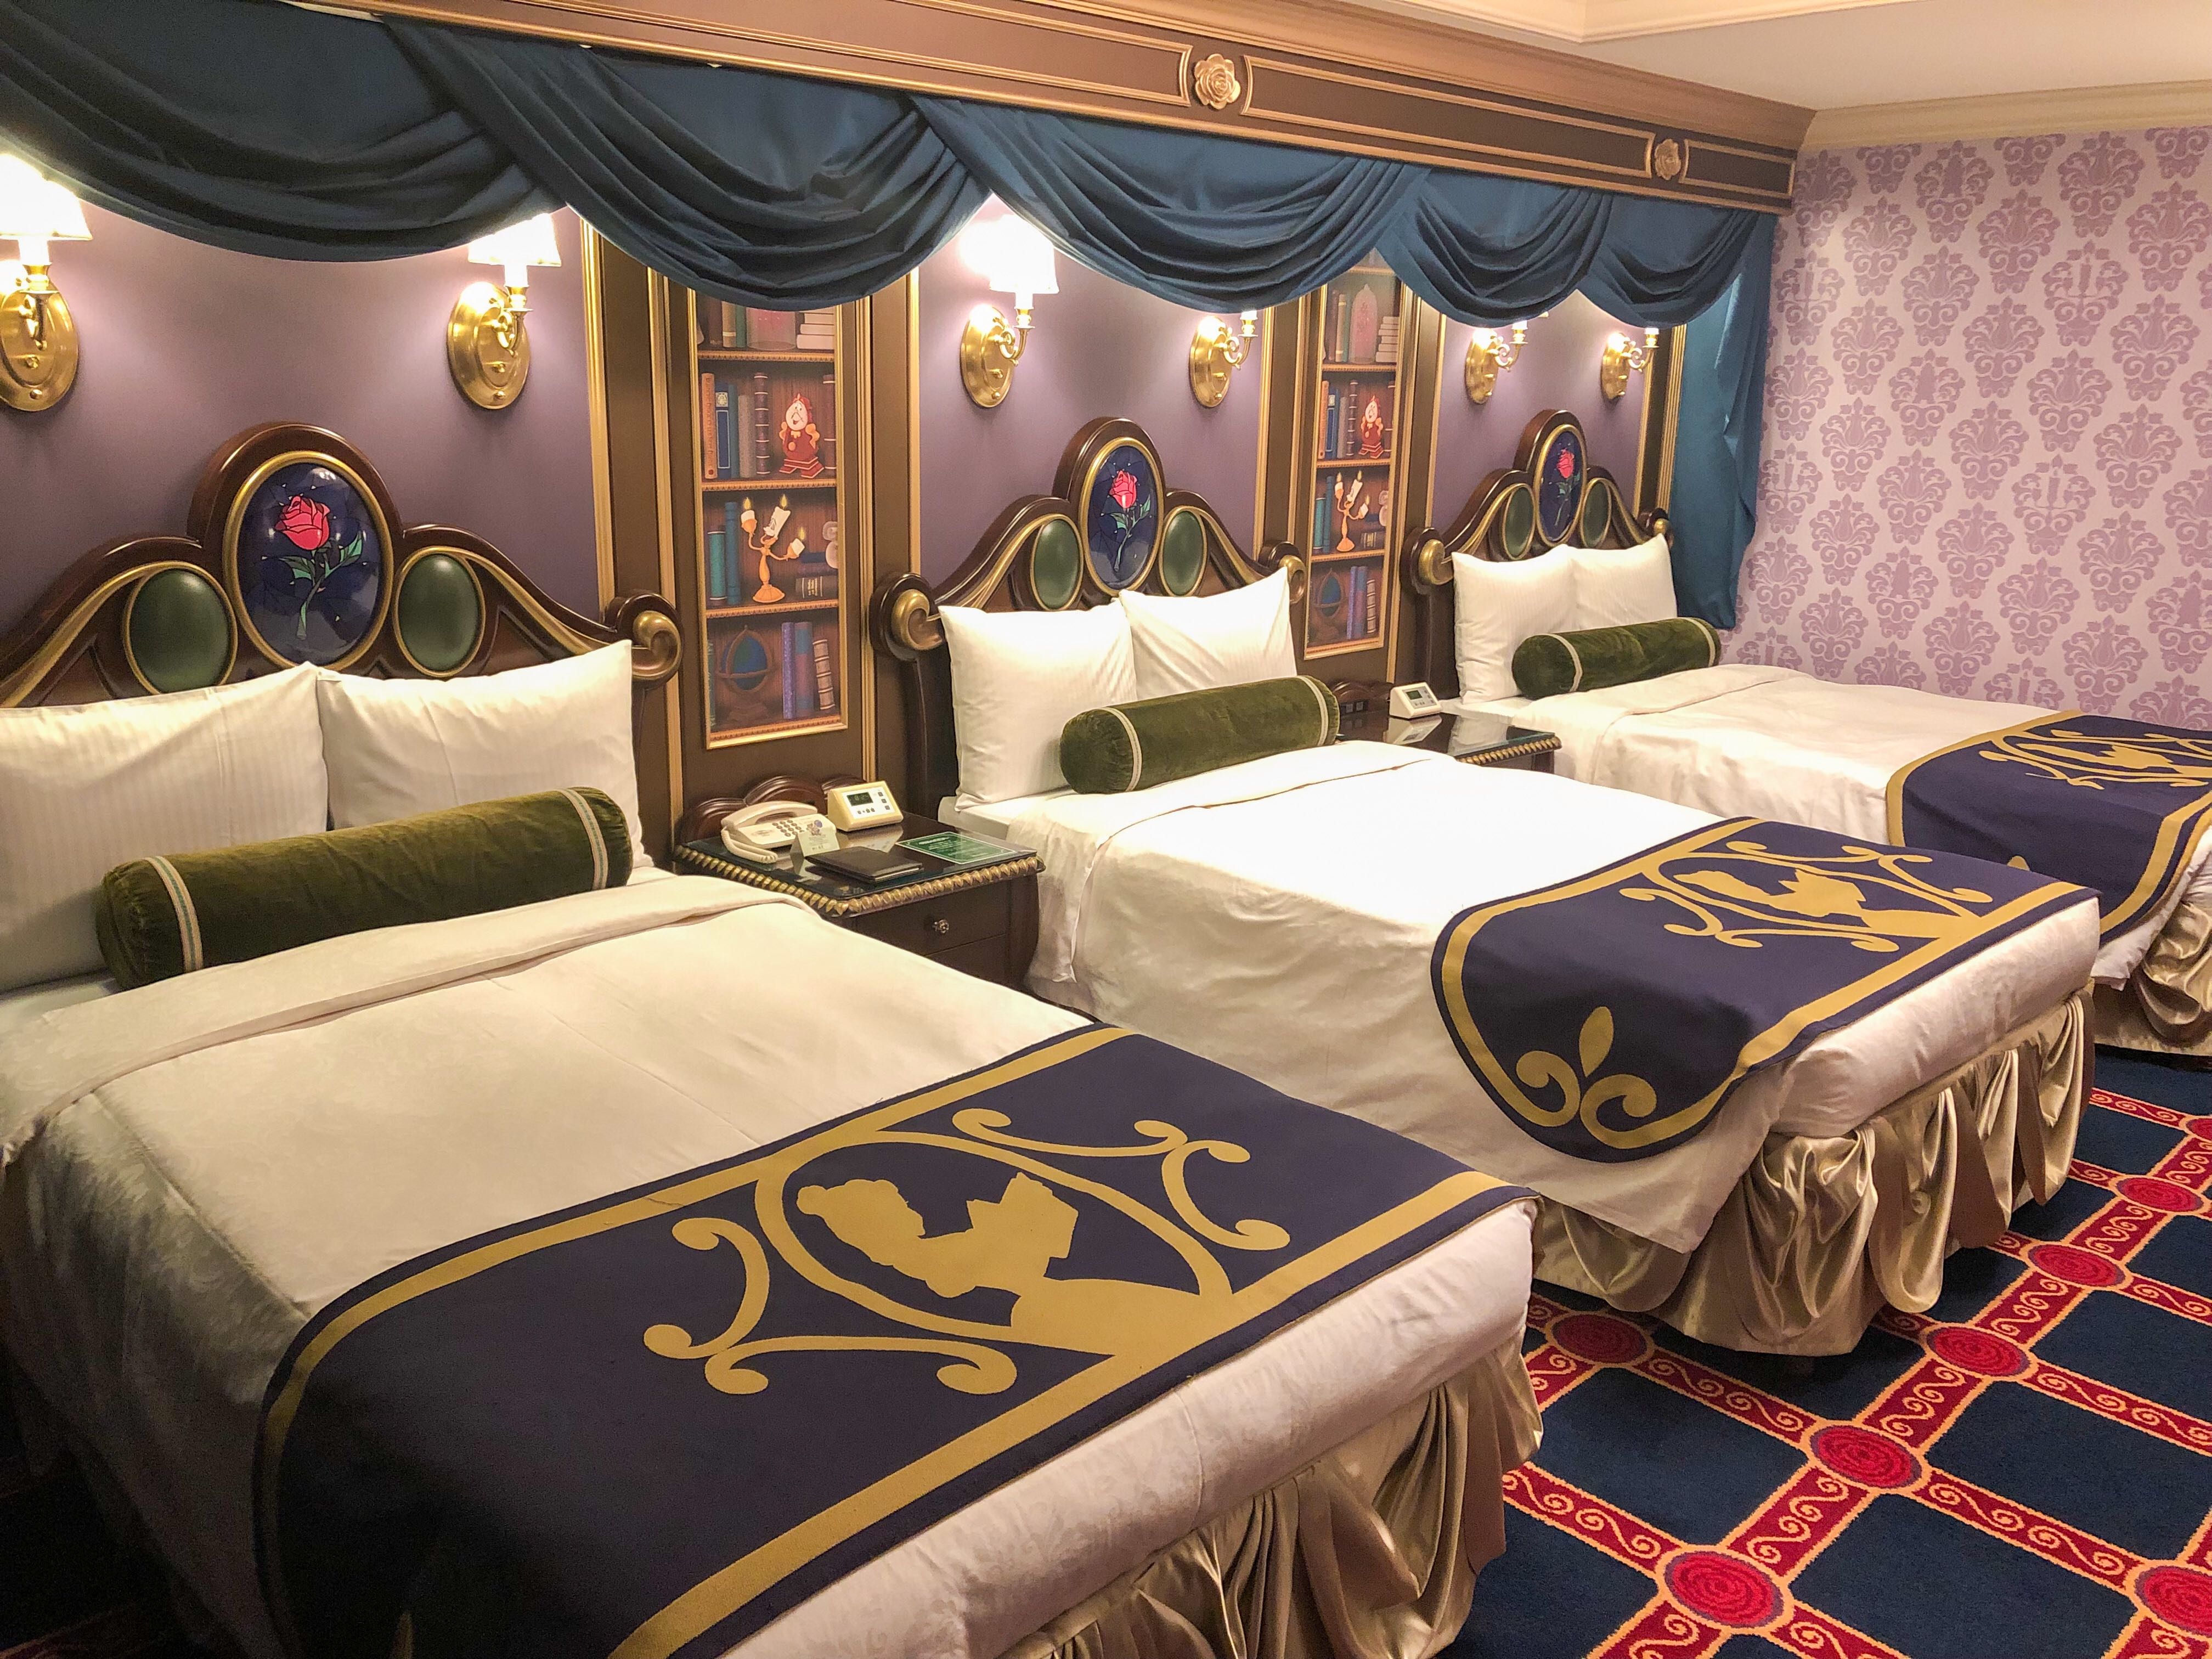 Photos Video Tour A Stunning Beauty And The Beast Themed Character Room At The Tokyo Disneyland Hotel Wdw News Today